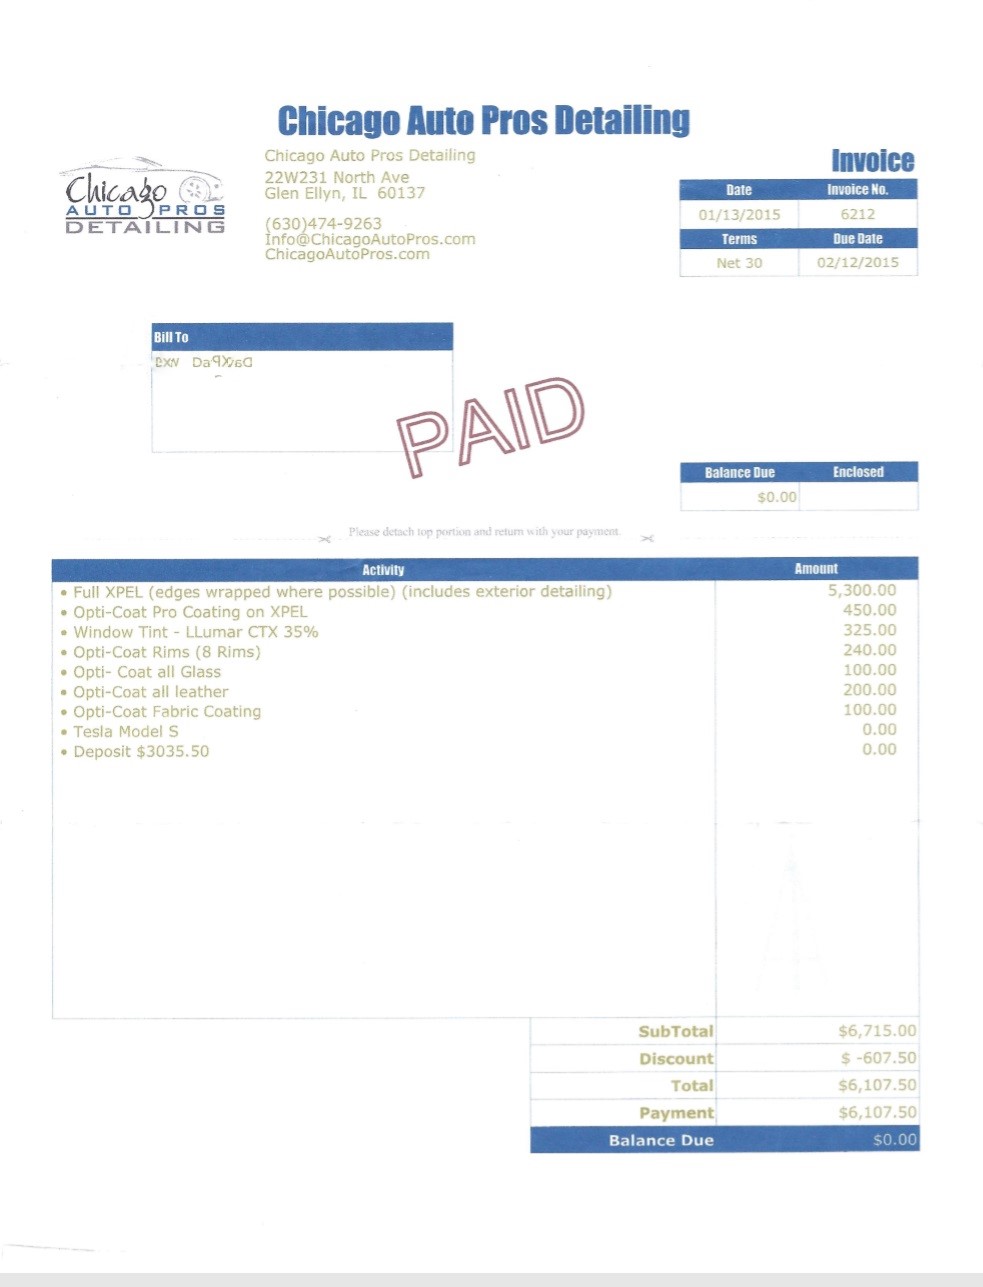 Xpel and tint invoice.jpg